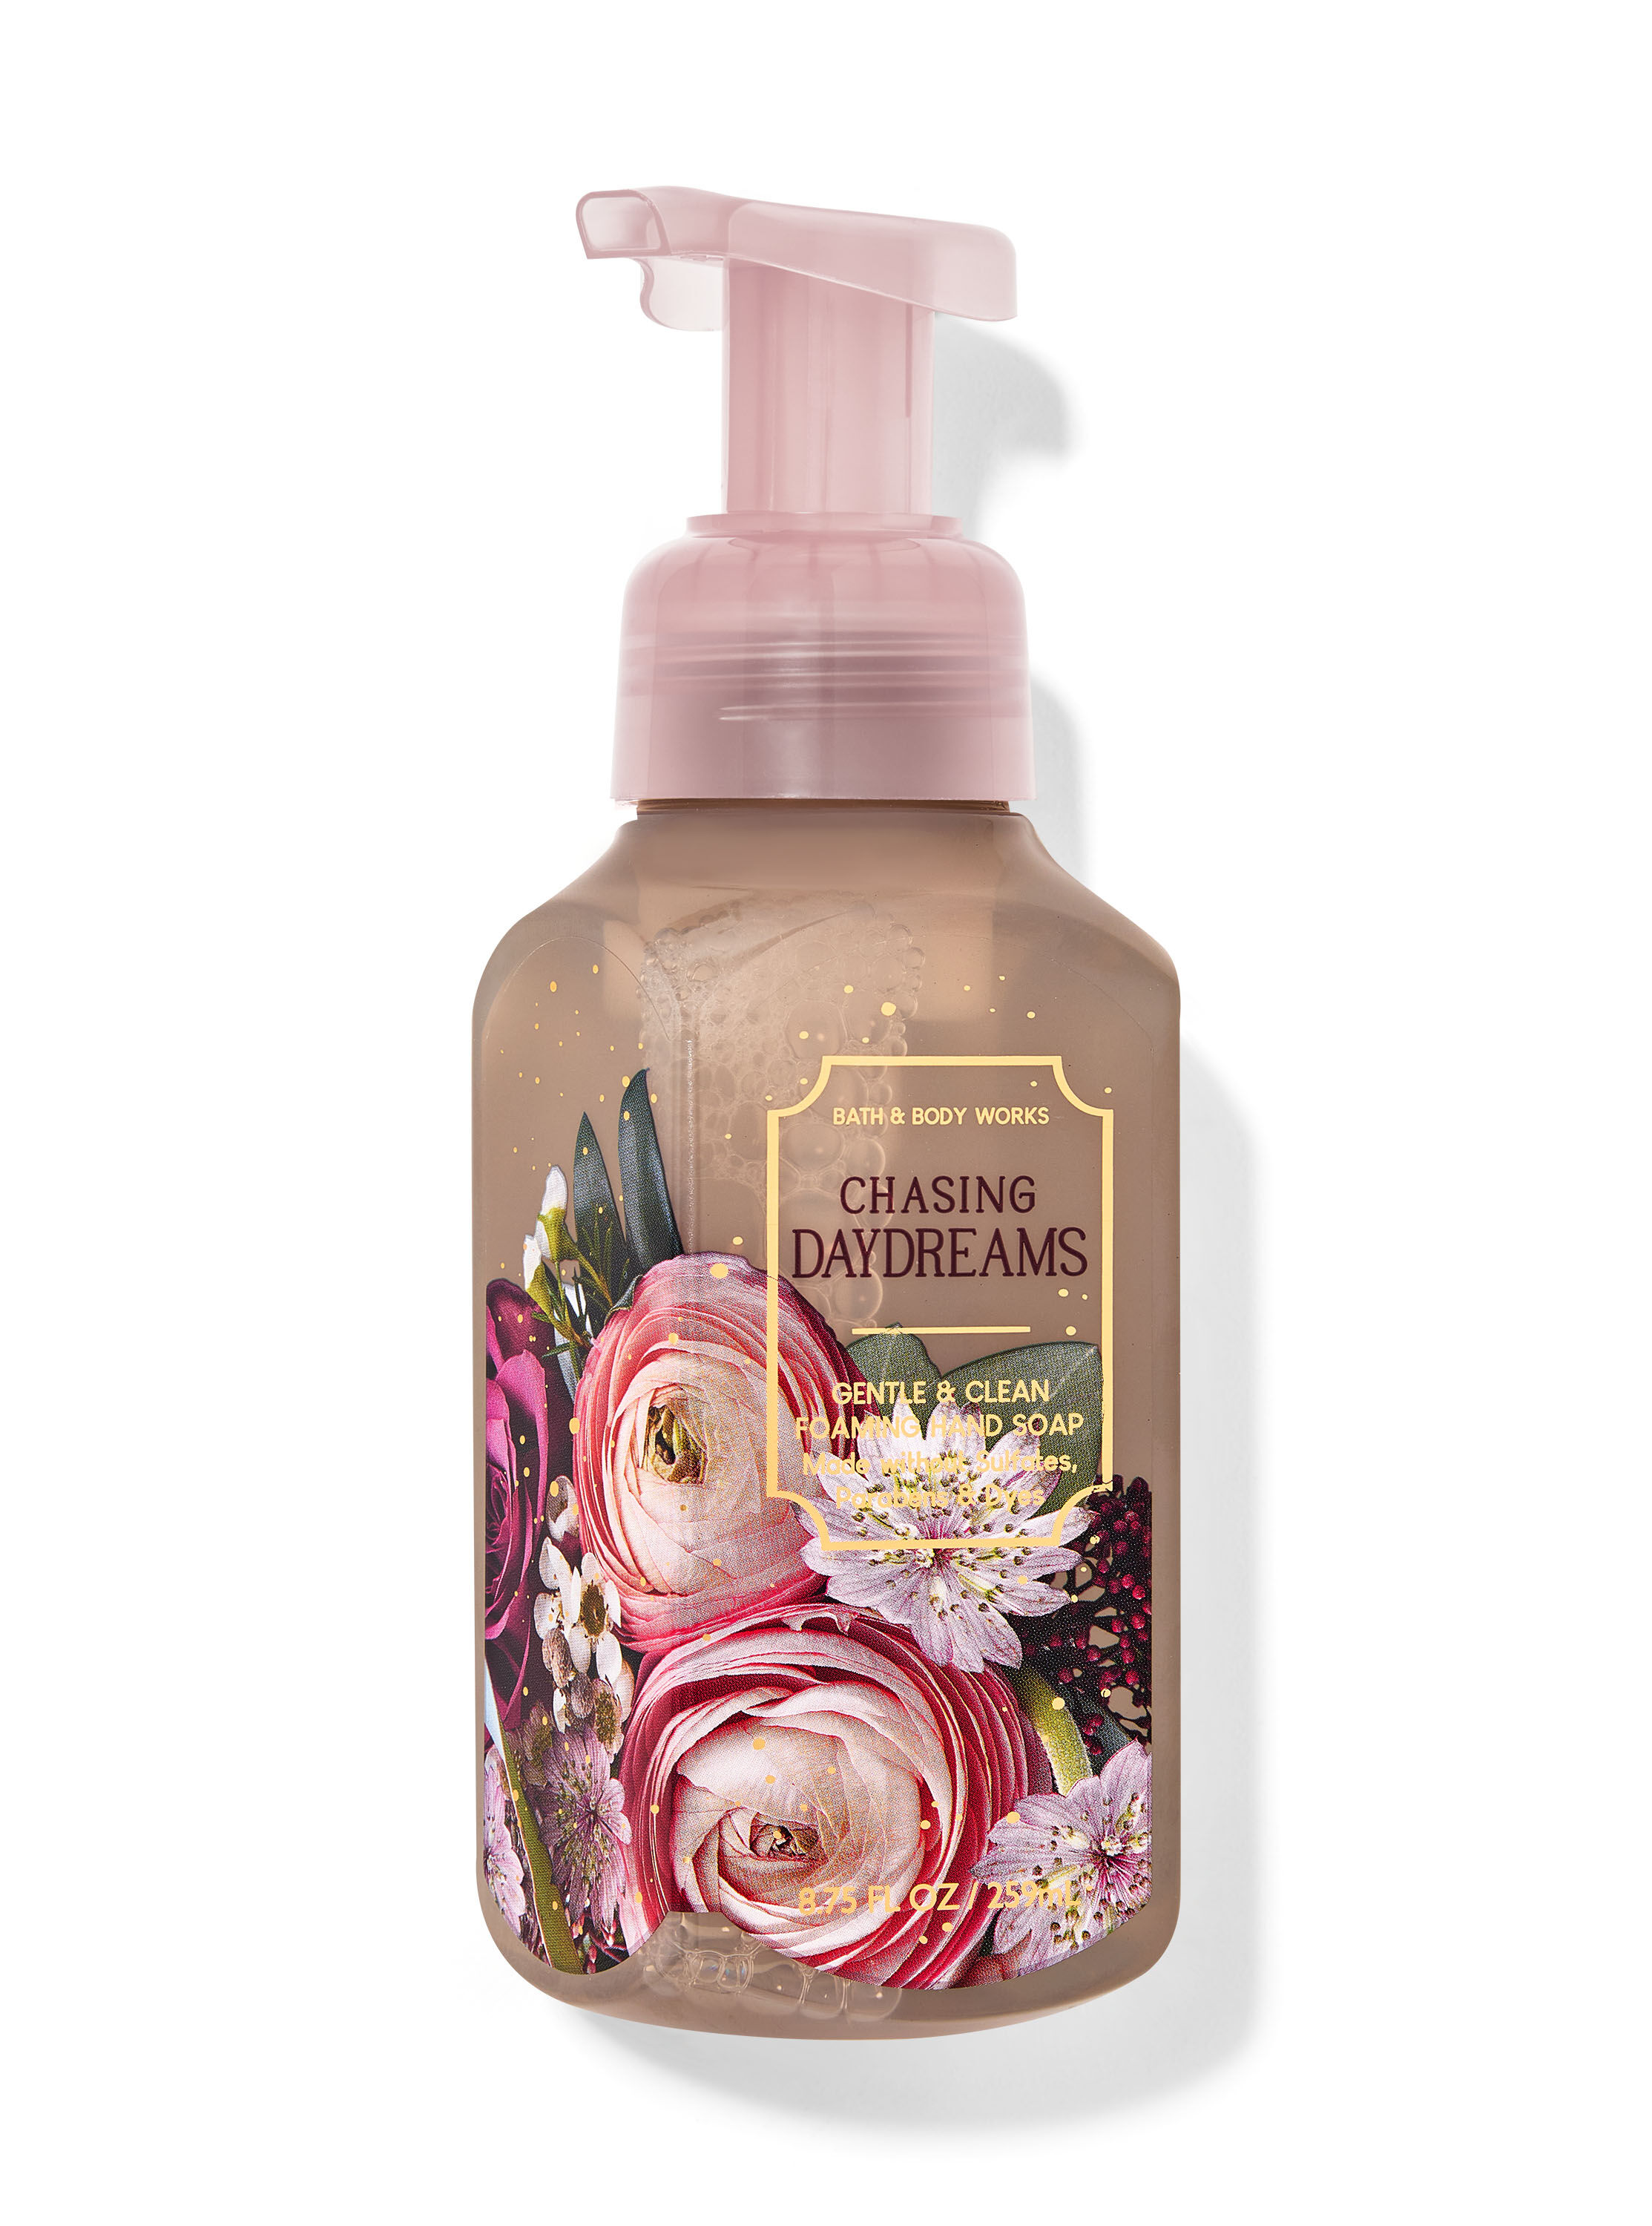 Chasing Daydreams Gentle & Clean Foaming Hand Soap